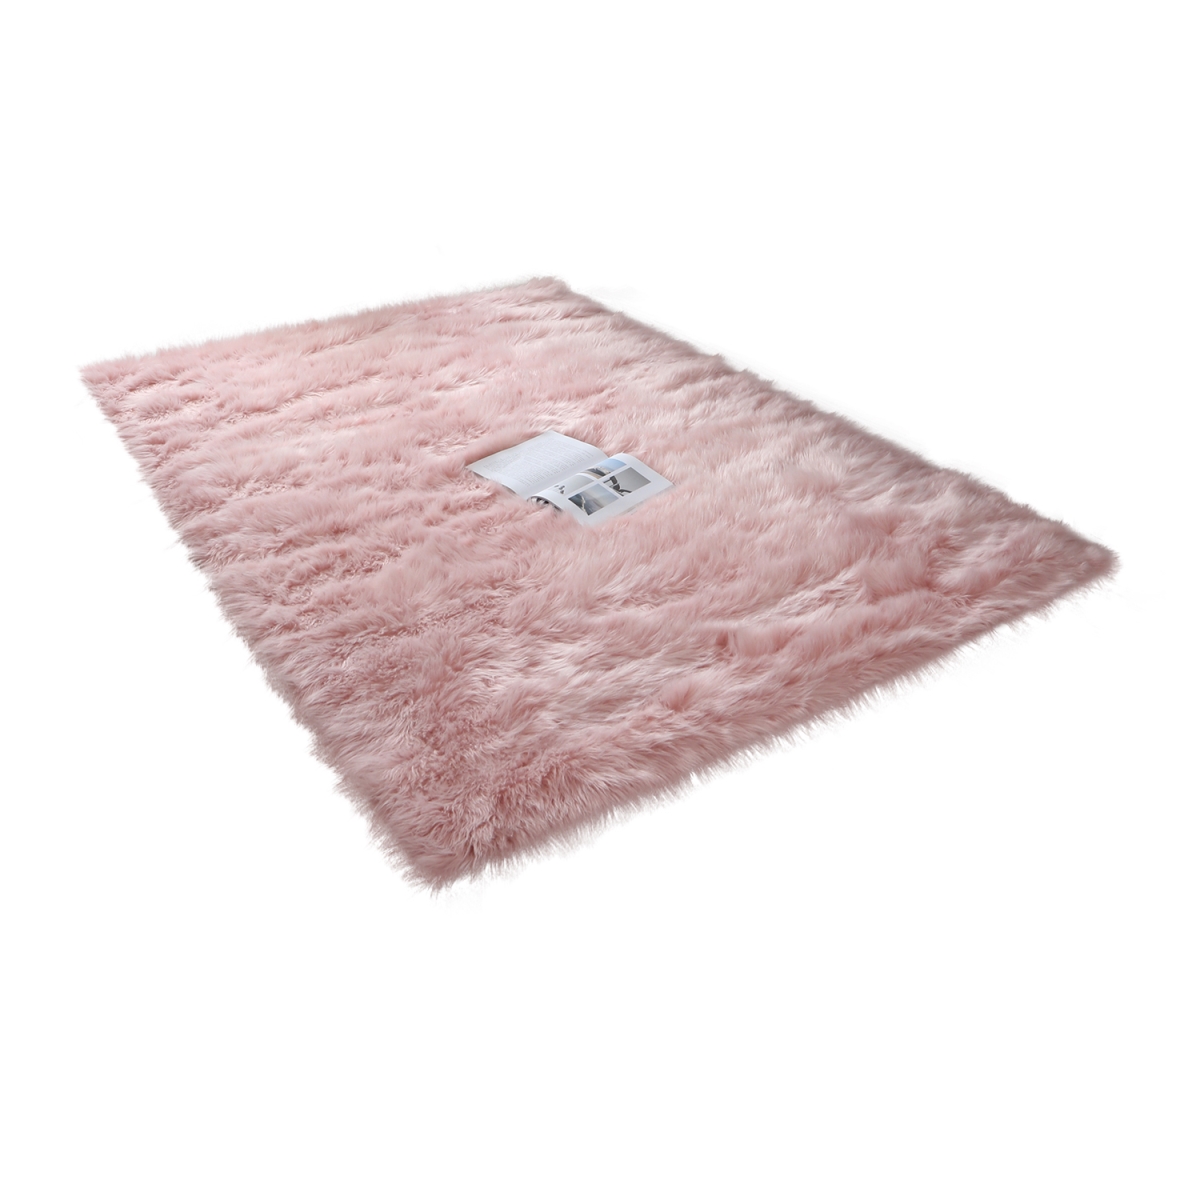 Picture of Amazing Rugs LSRPK0033-35 3 x 5 ft. Cozy Collection Ultra Soft Fluffy Faux Fur Sheepskin Hand Tufted Area Rug